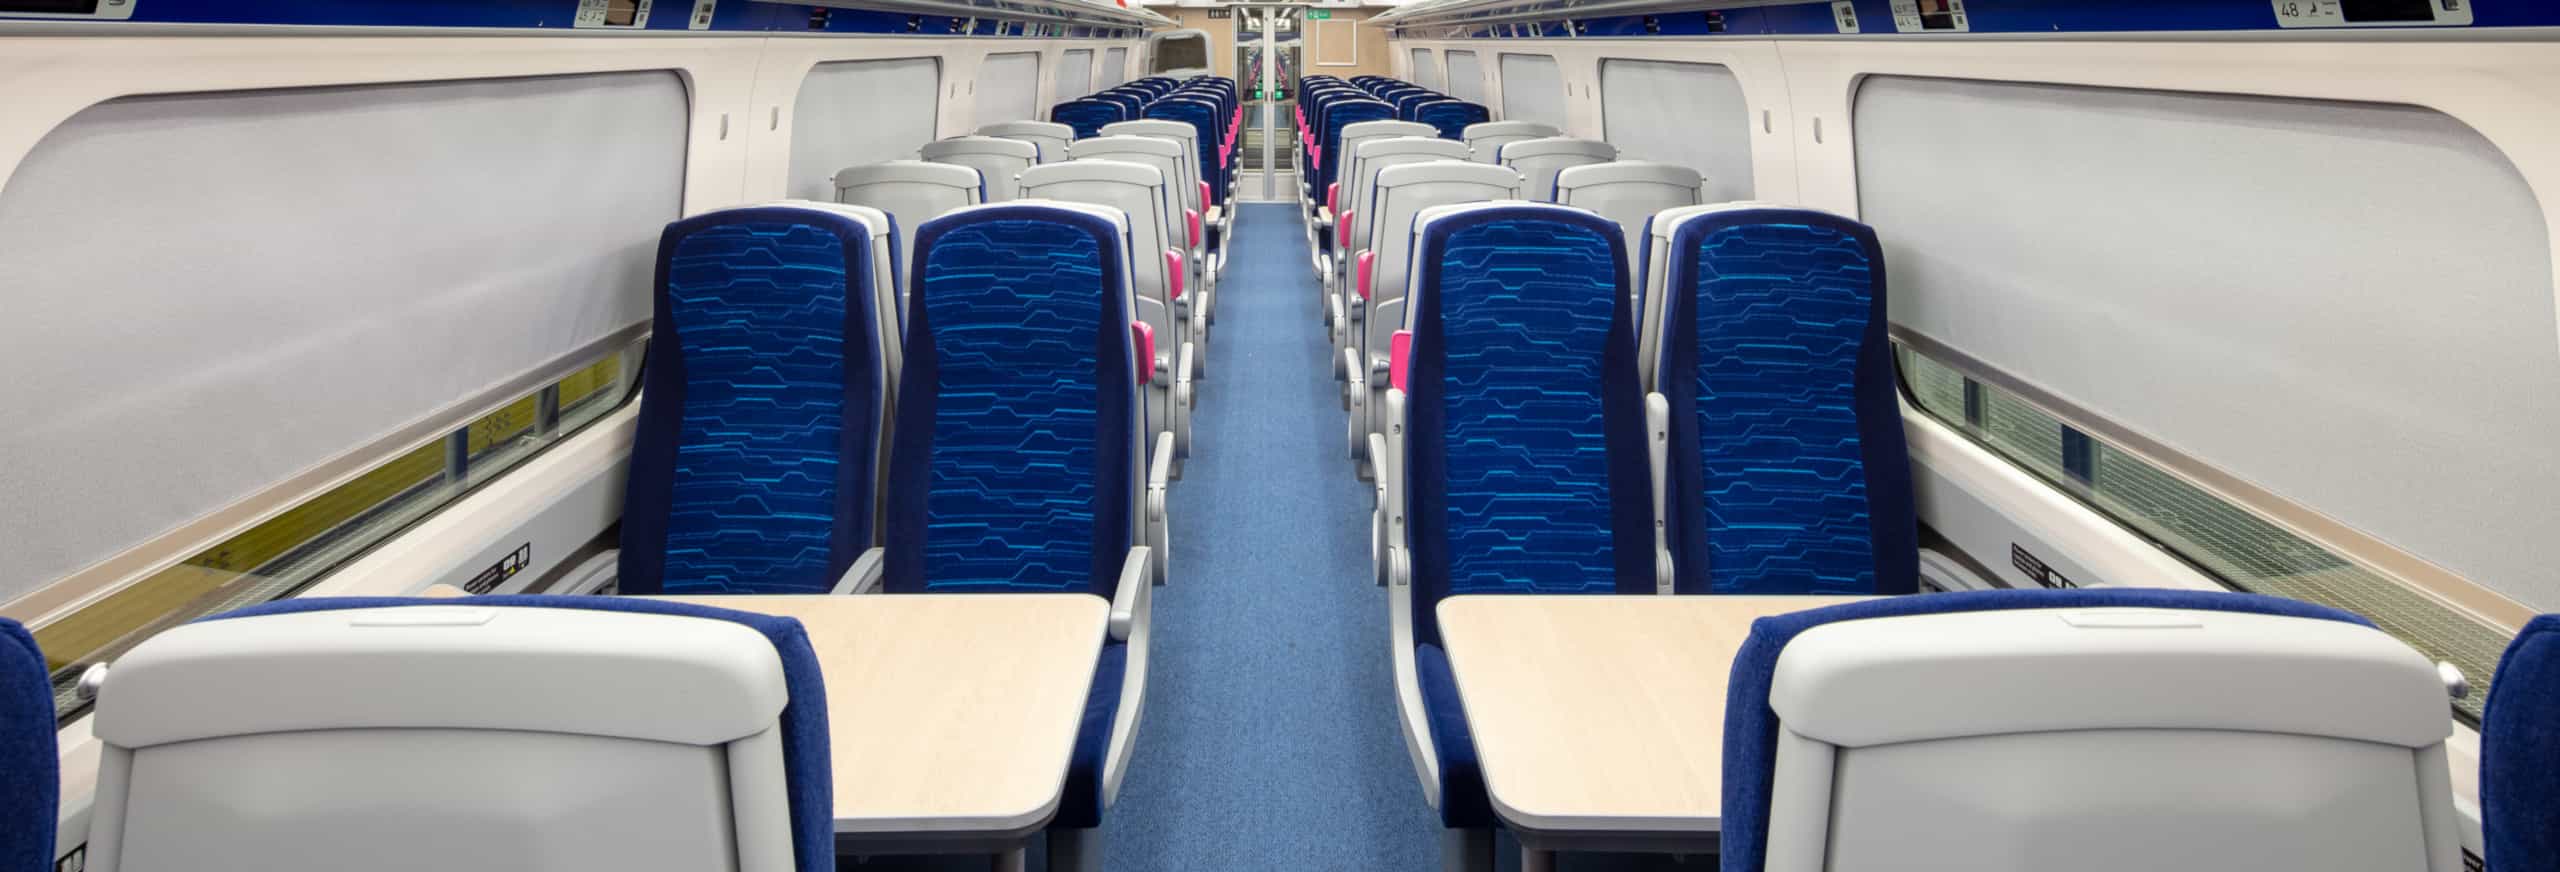 Hull Trains Paragon standard class seating